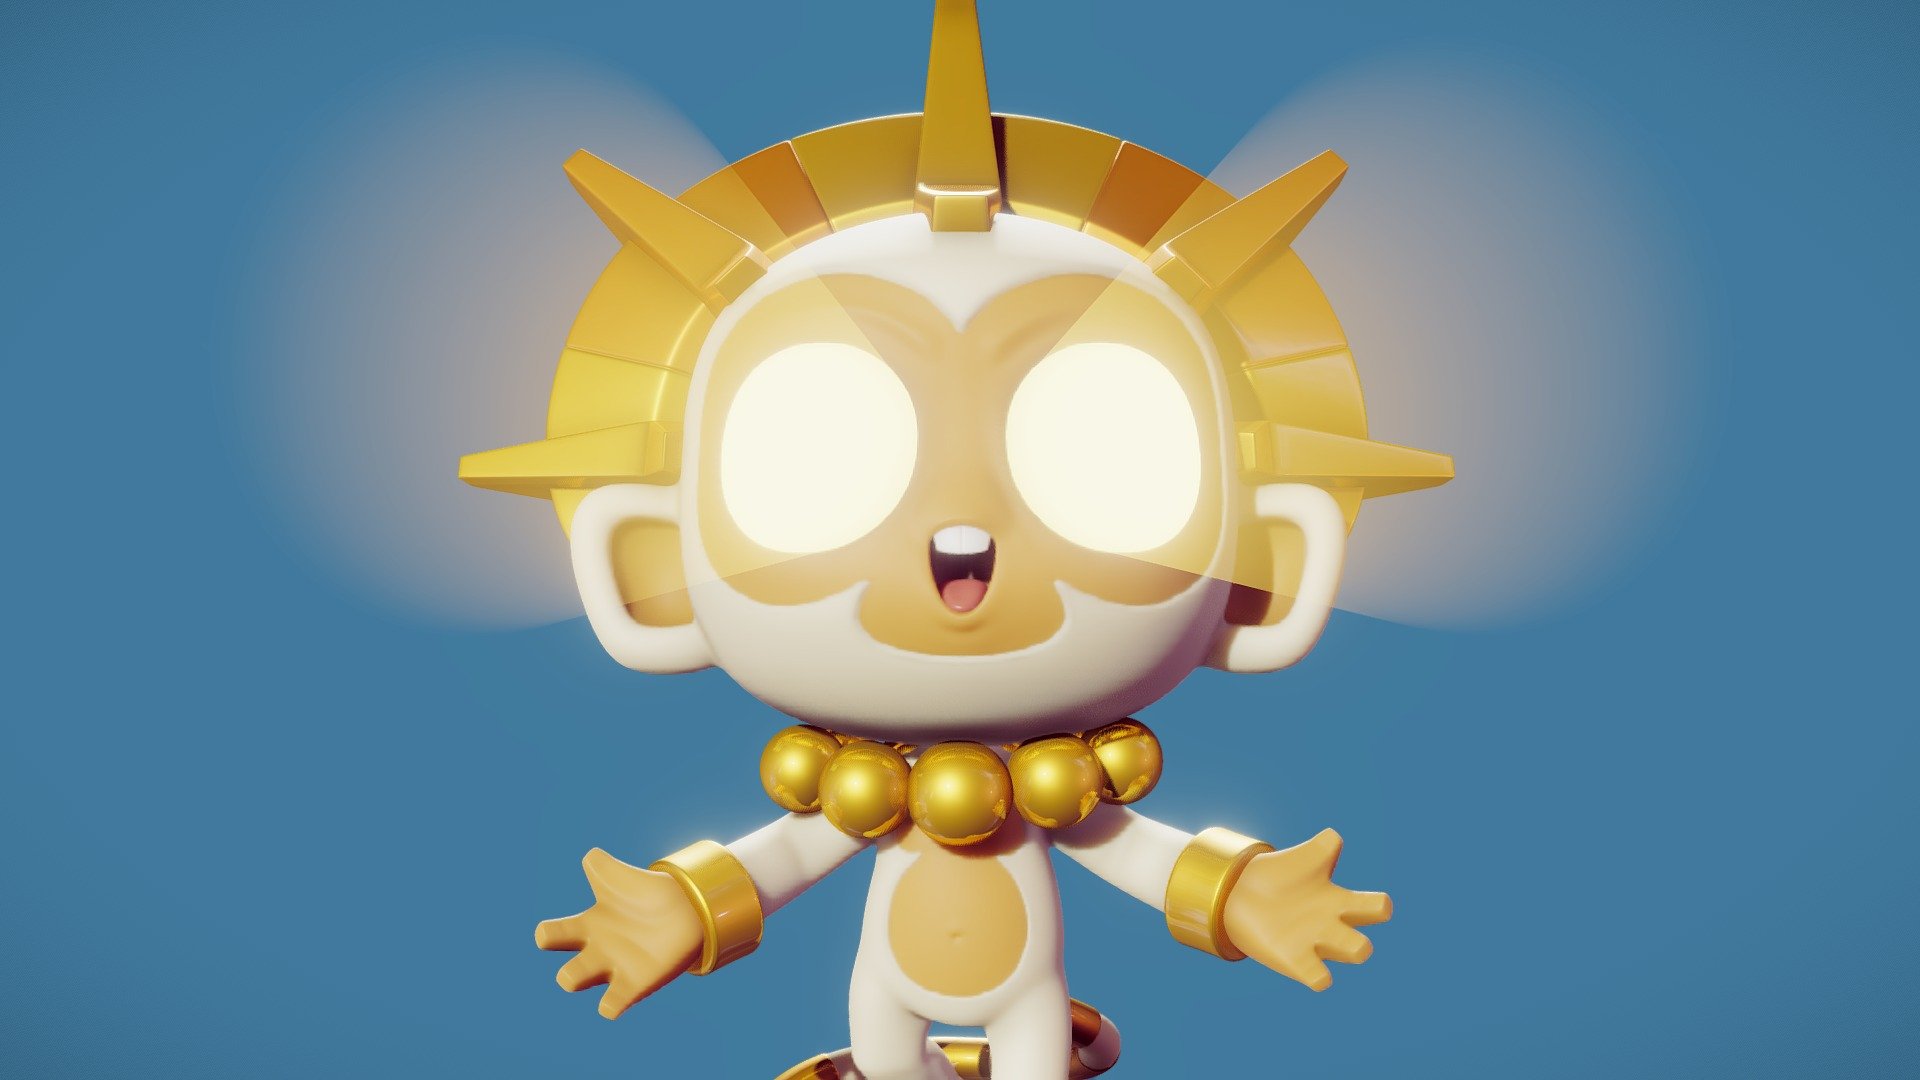 Fan art of The Sun God from Bloons Tower Defense 6 3d model